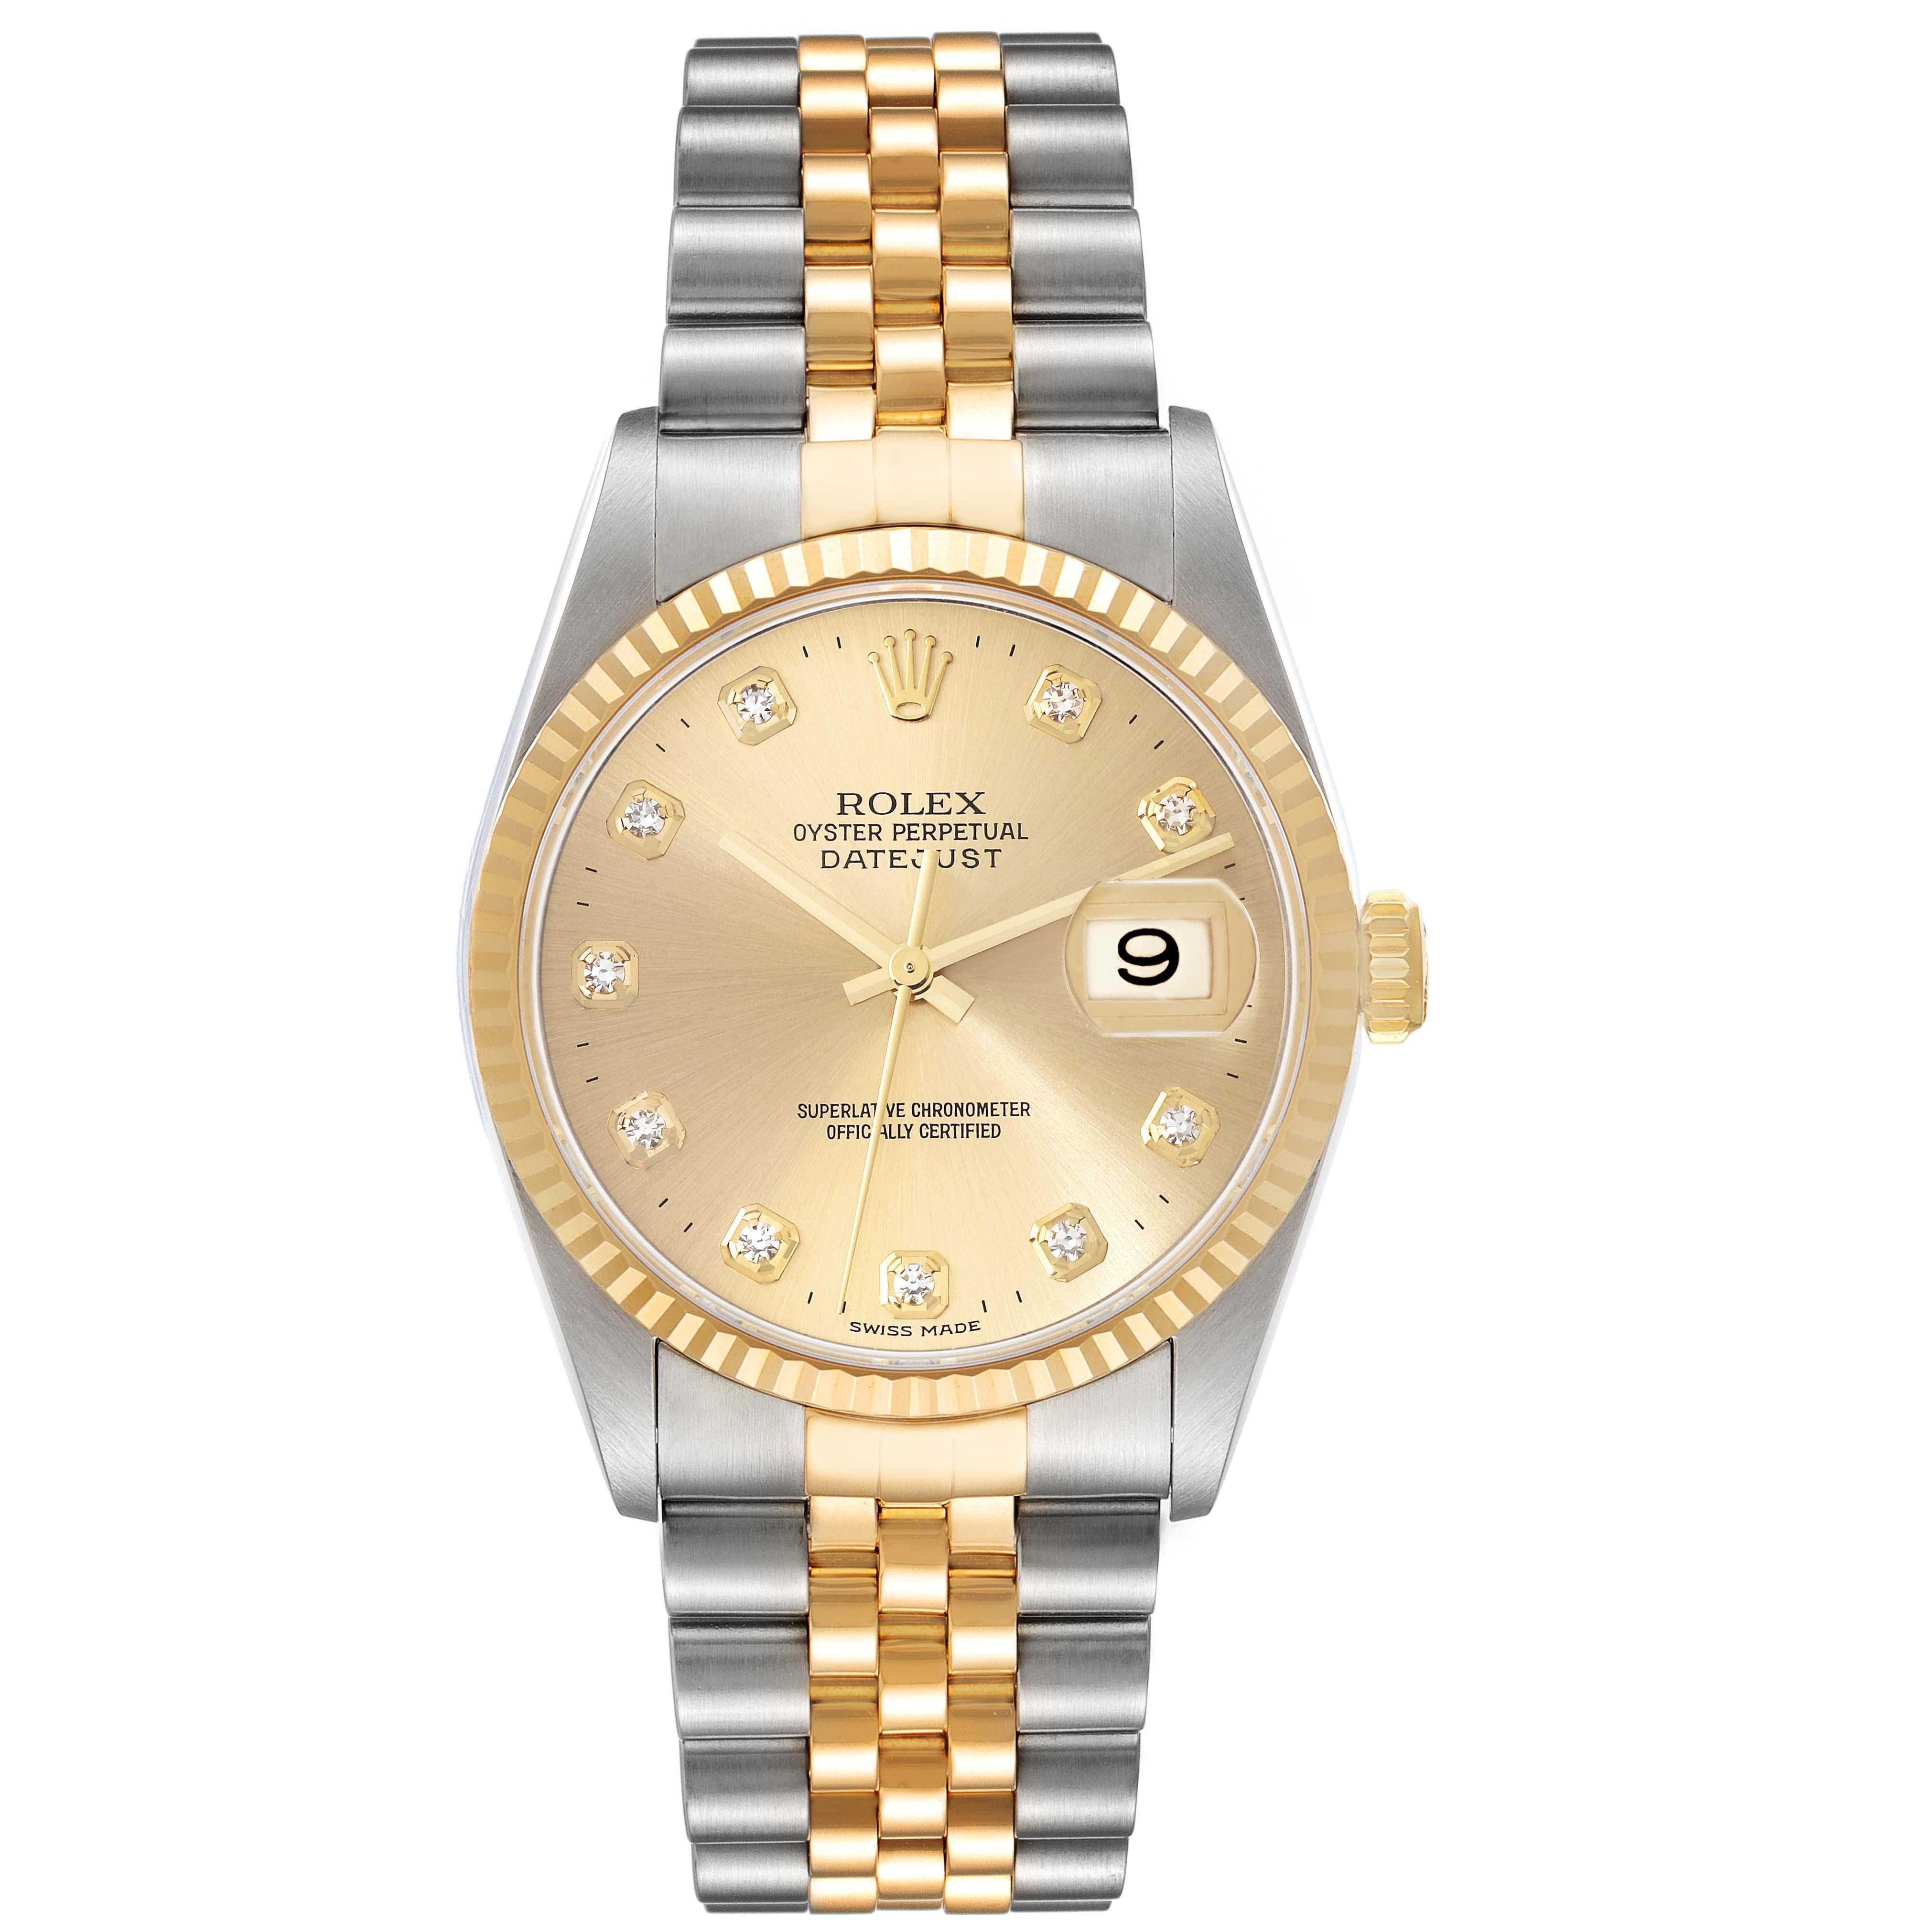 Rolex Datejust Diamond Dial Steel Yellow Gold Mens Watch 16233 Box Papers. Officially certified chronometer automatic self-winding movement. Stainless steel case 36 mm in diameter.  Rolex logo on an 18K yellow gold crown. 18k yellow gold fluted